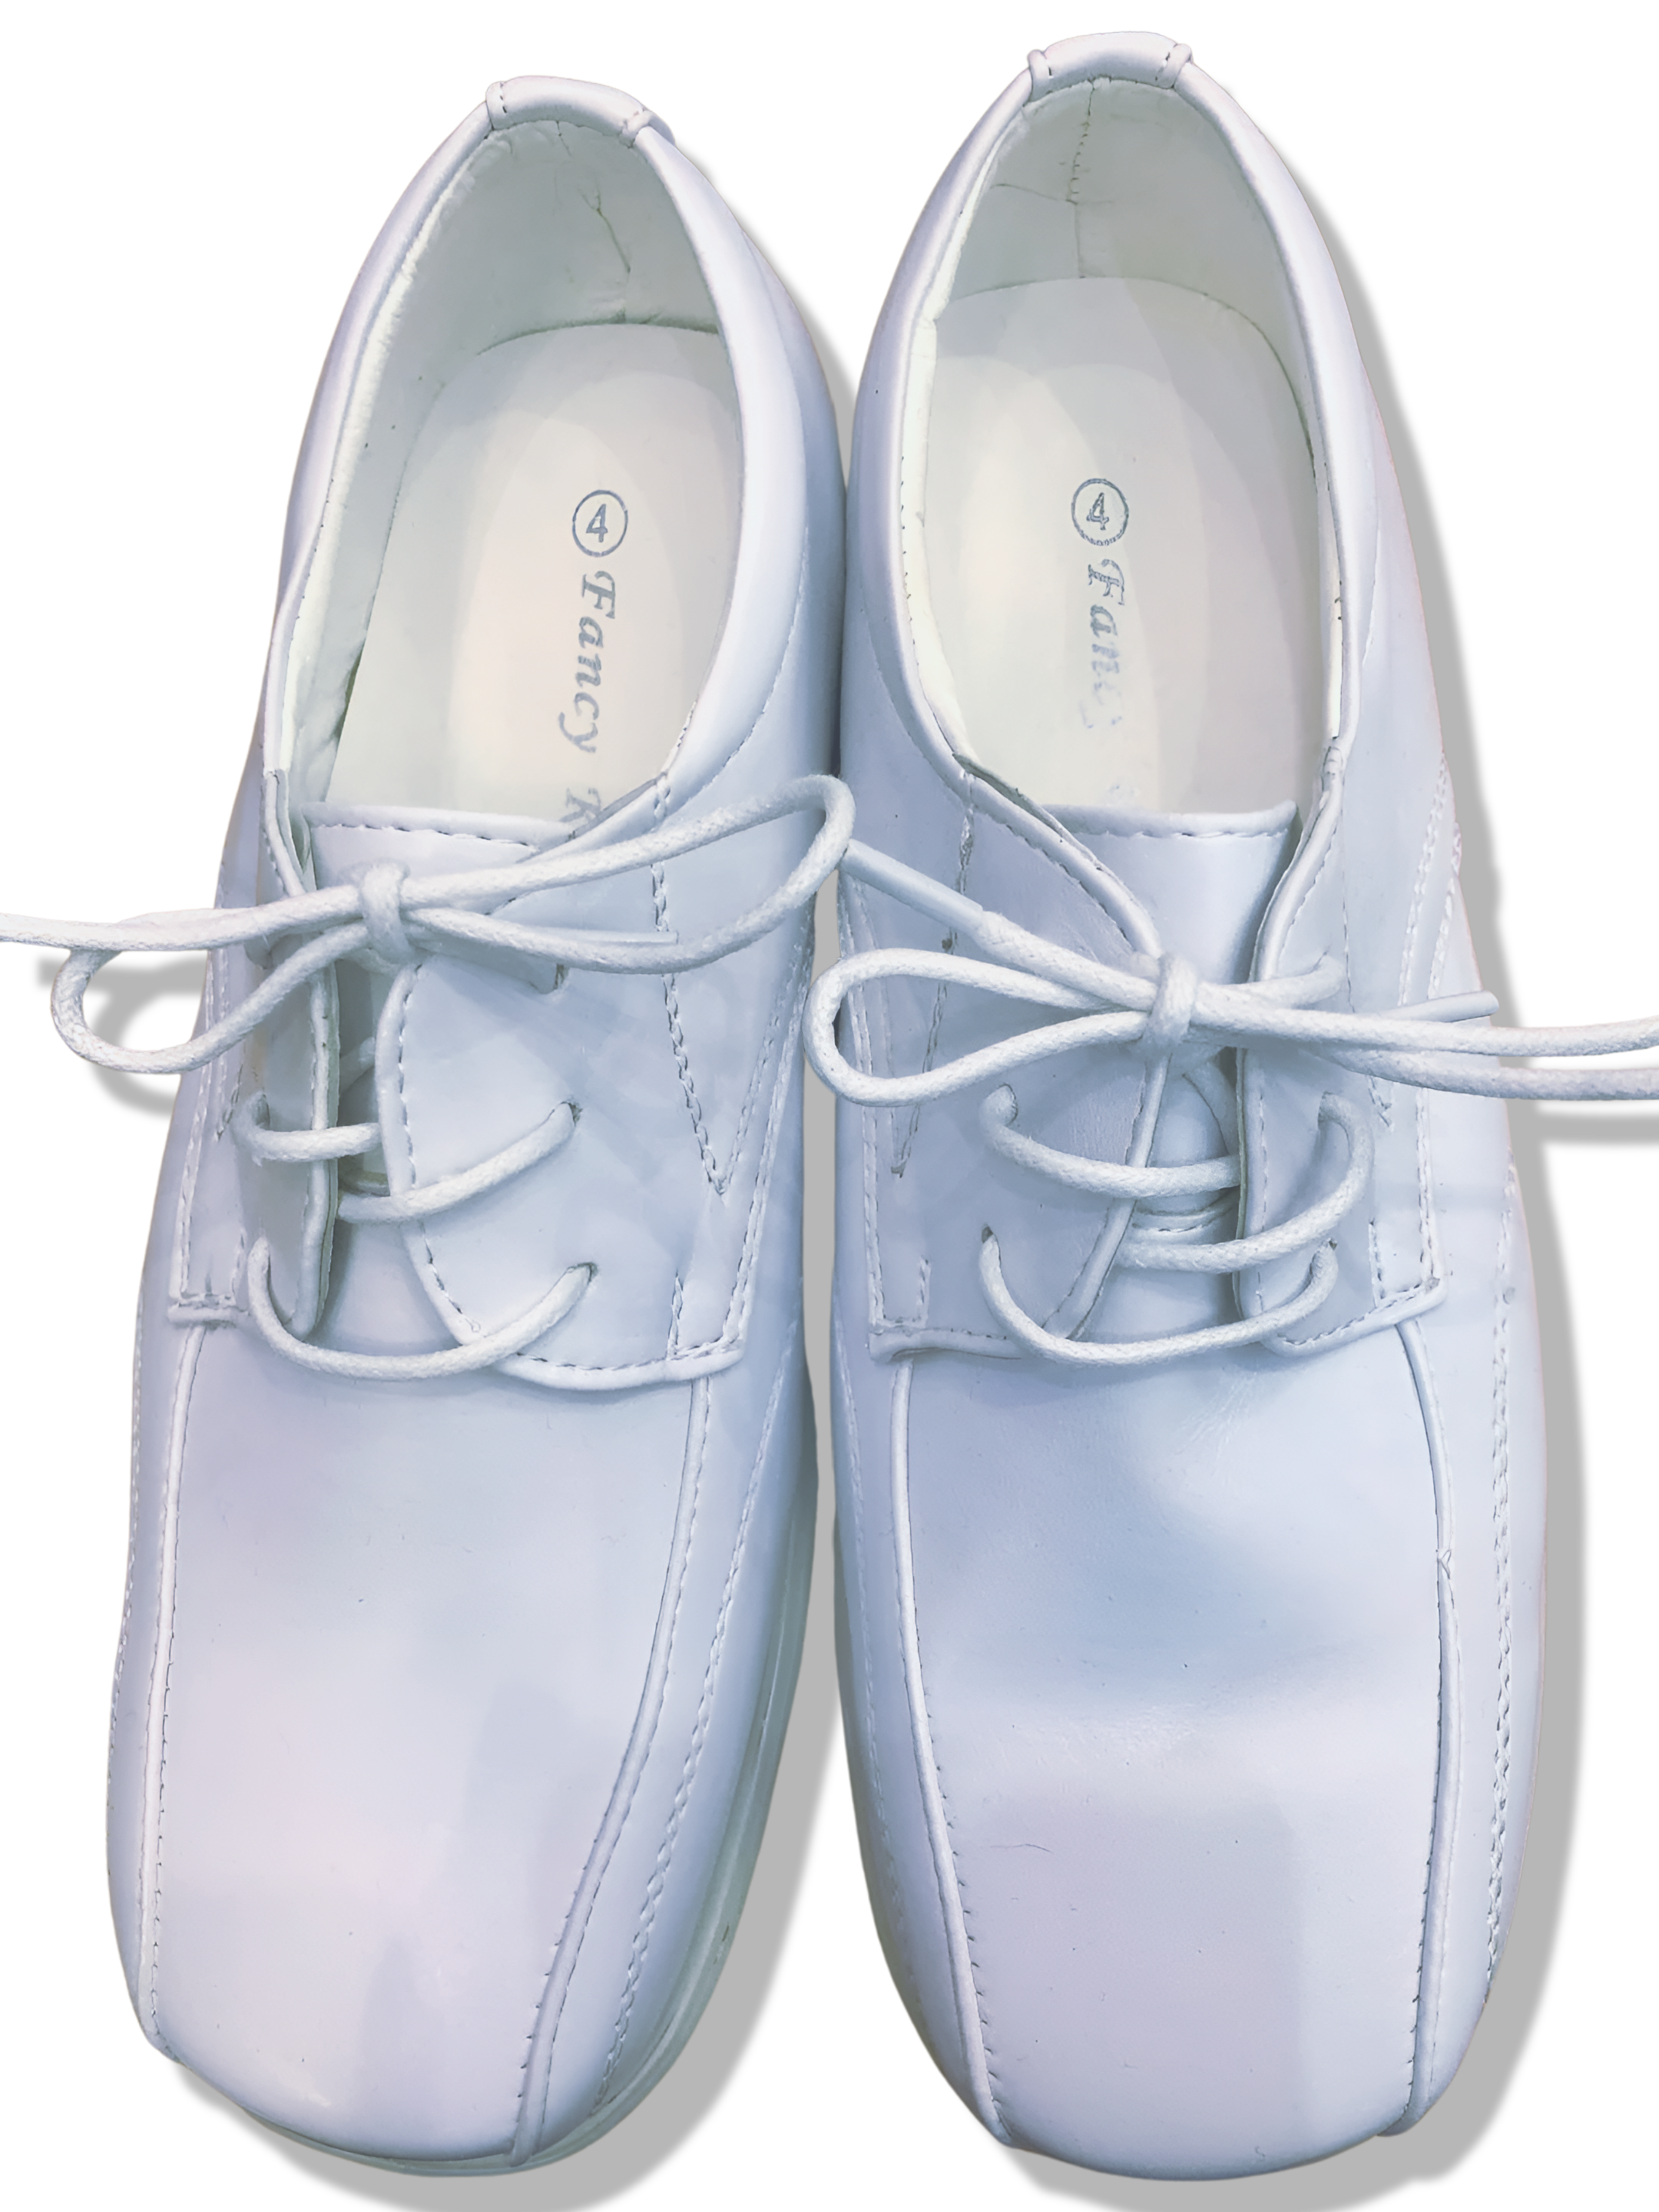 Boys White Shoes - LM2